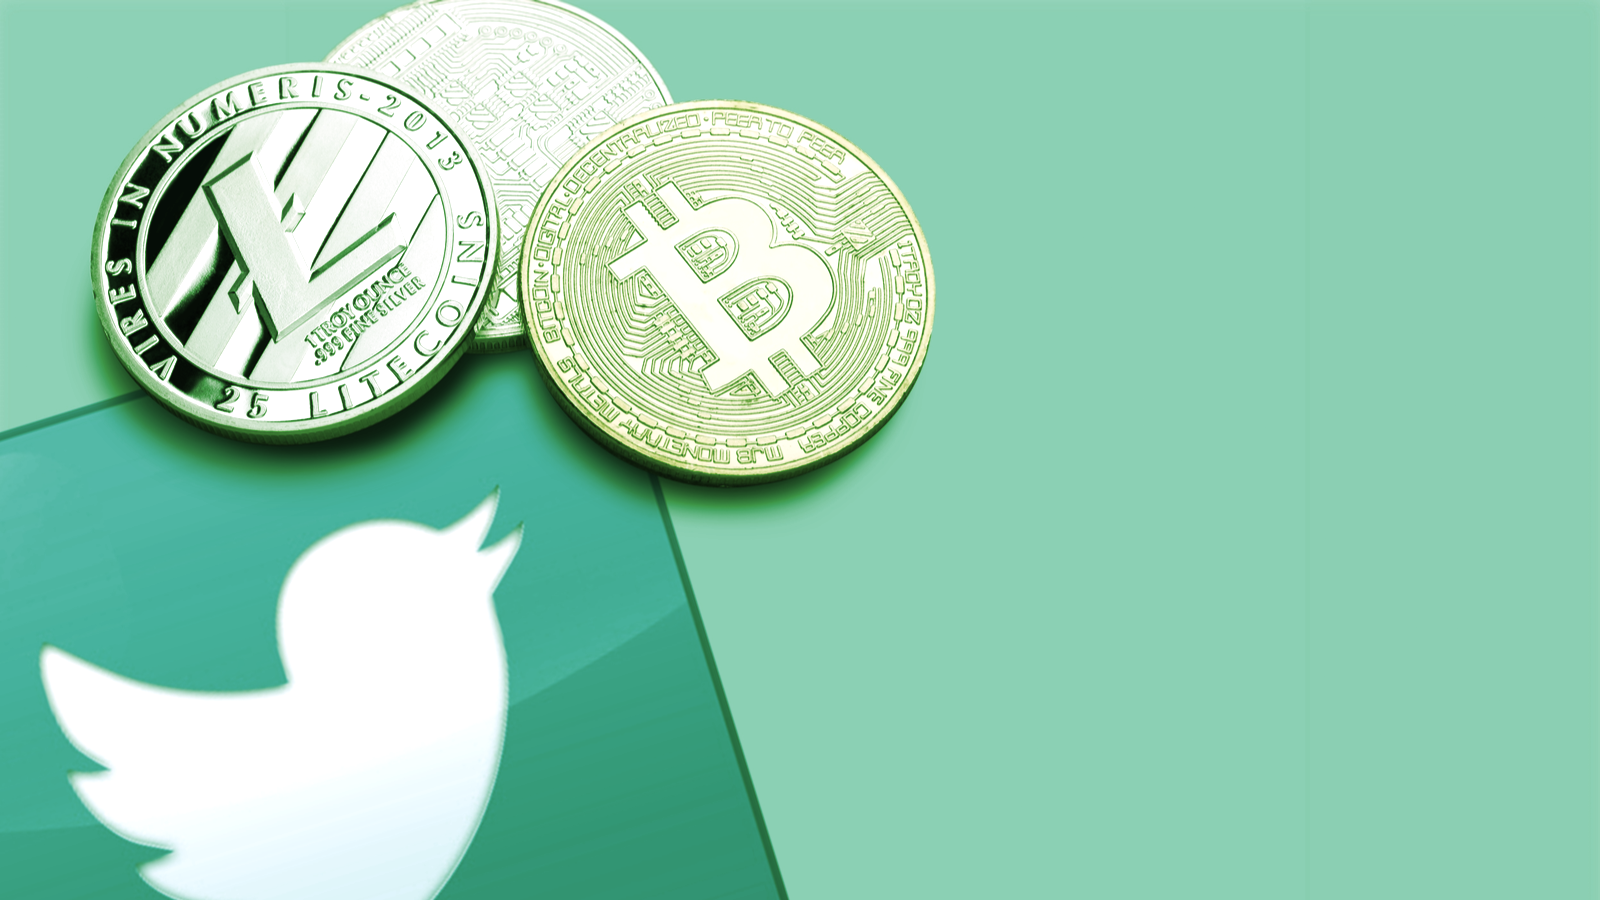 A large portion of the crypto discourse occurs on Twitter. Image: Shutterstock